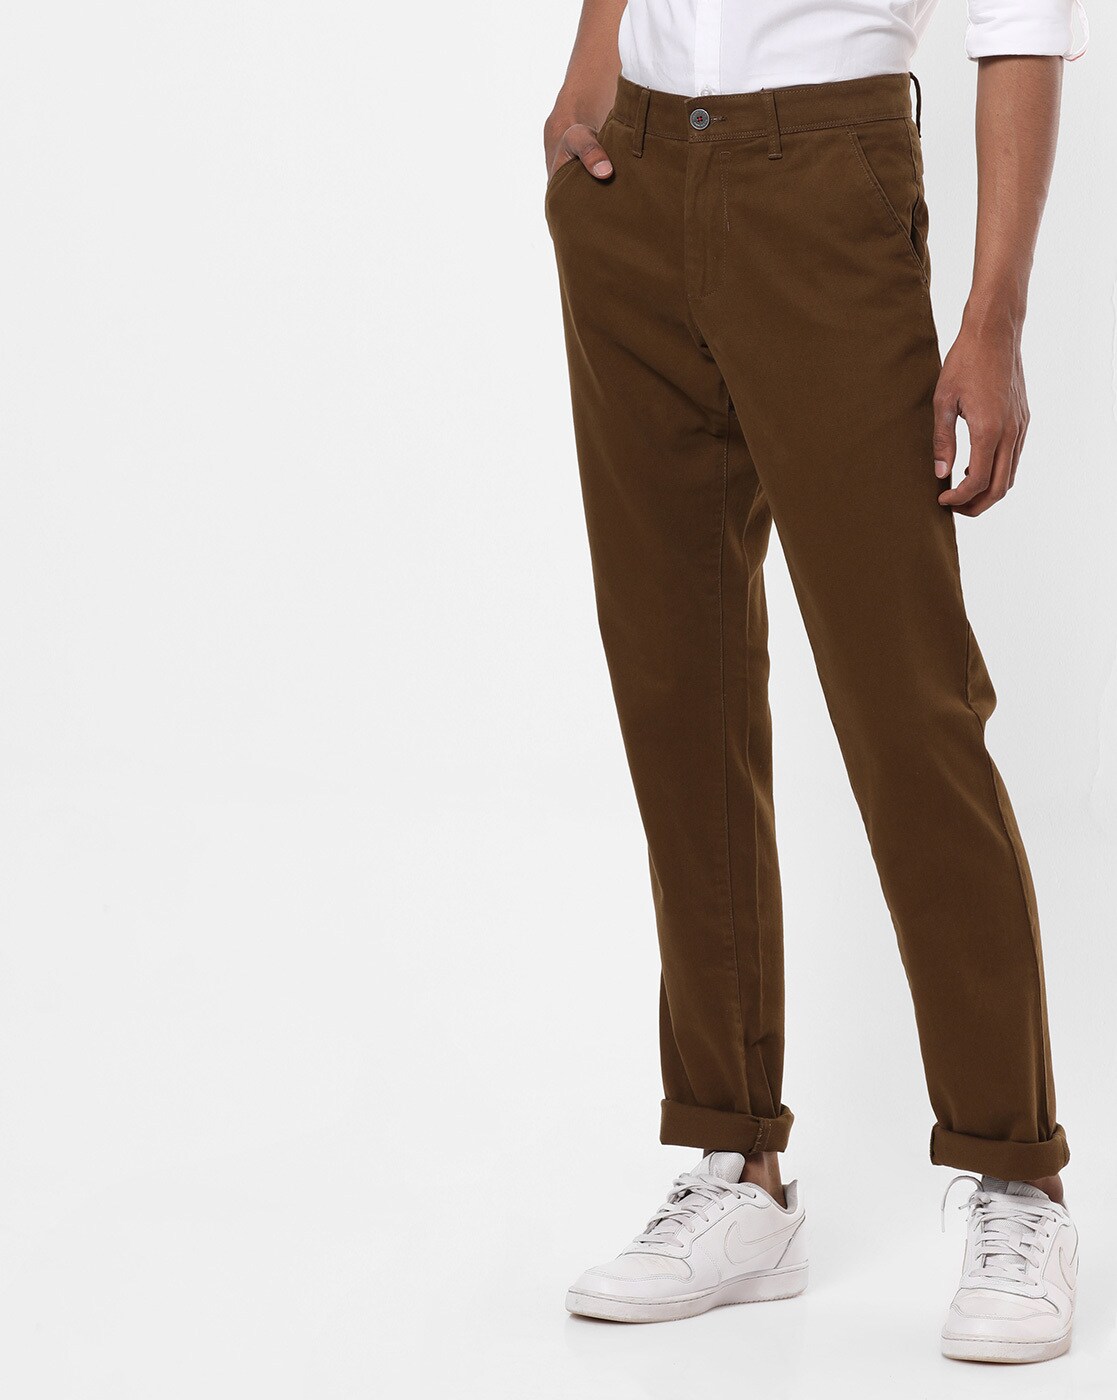 Details more than 81 oxemberg trousers brawn fit best - in.coedo.com.vn